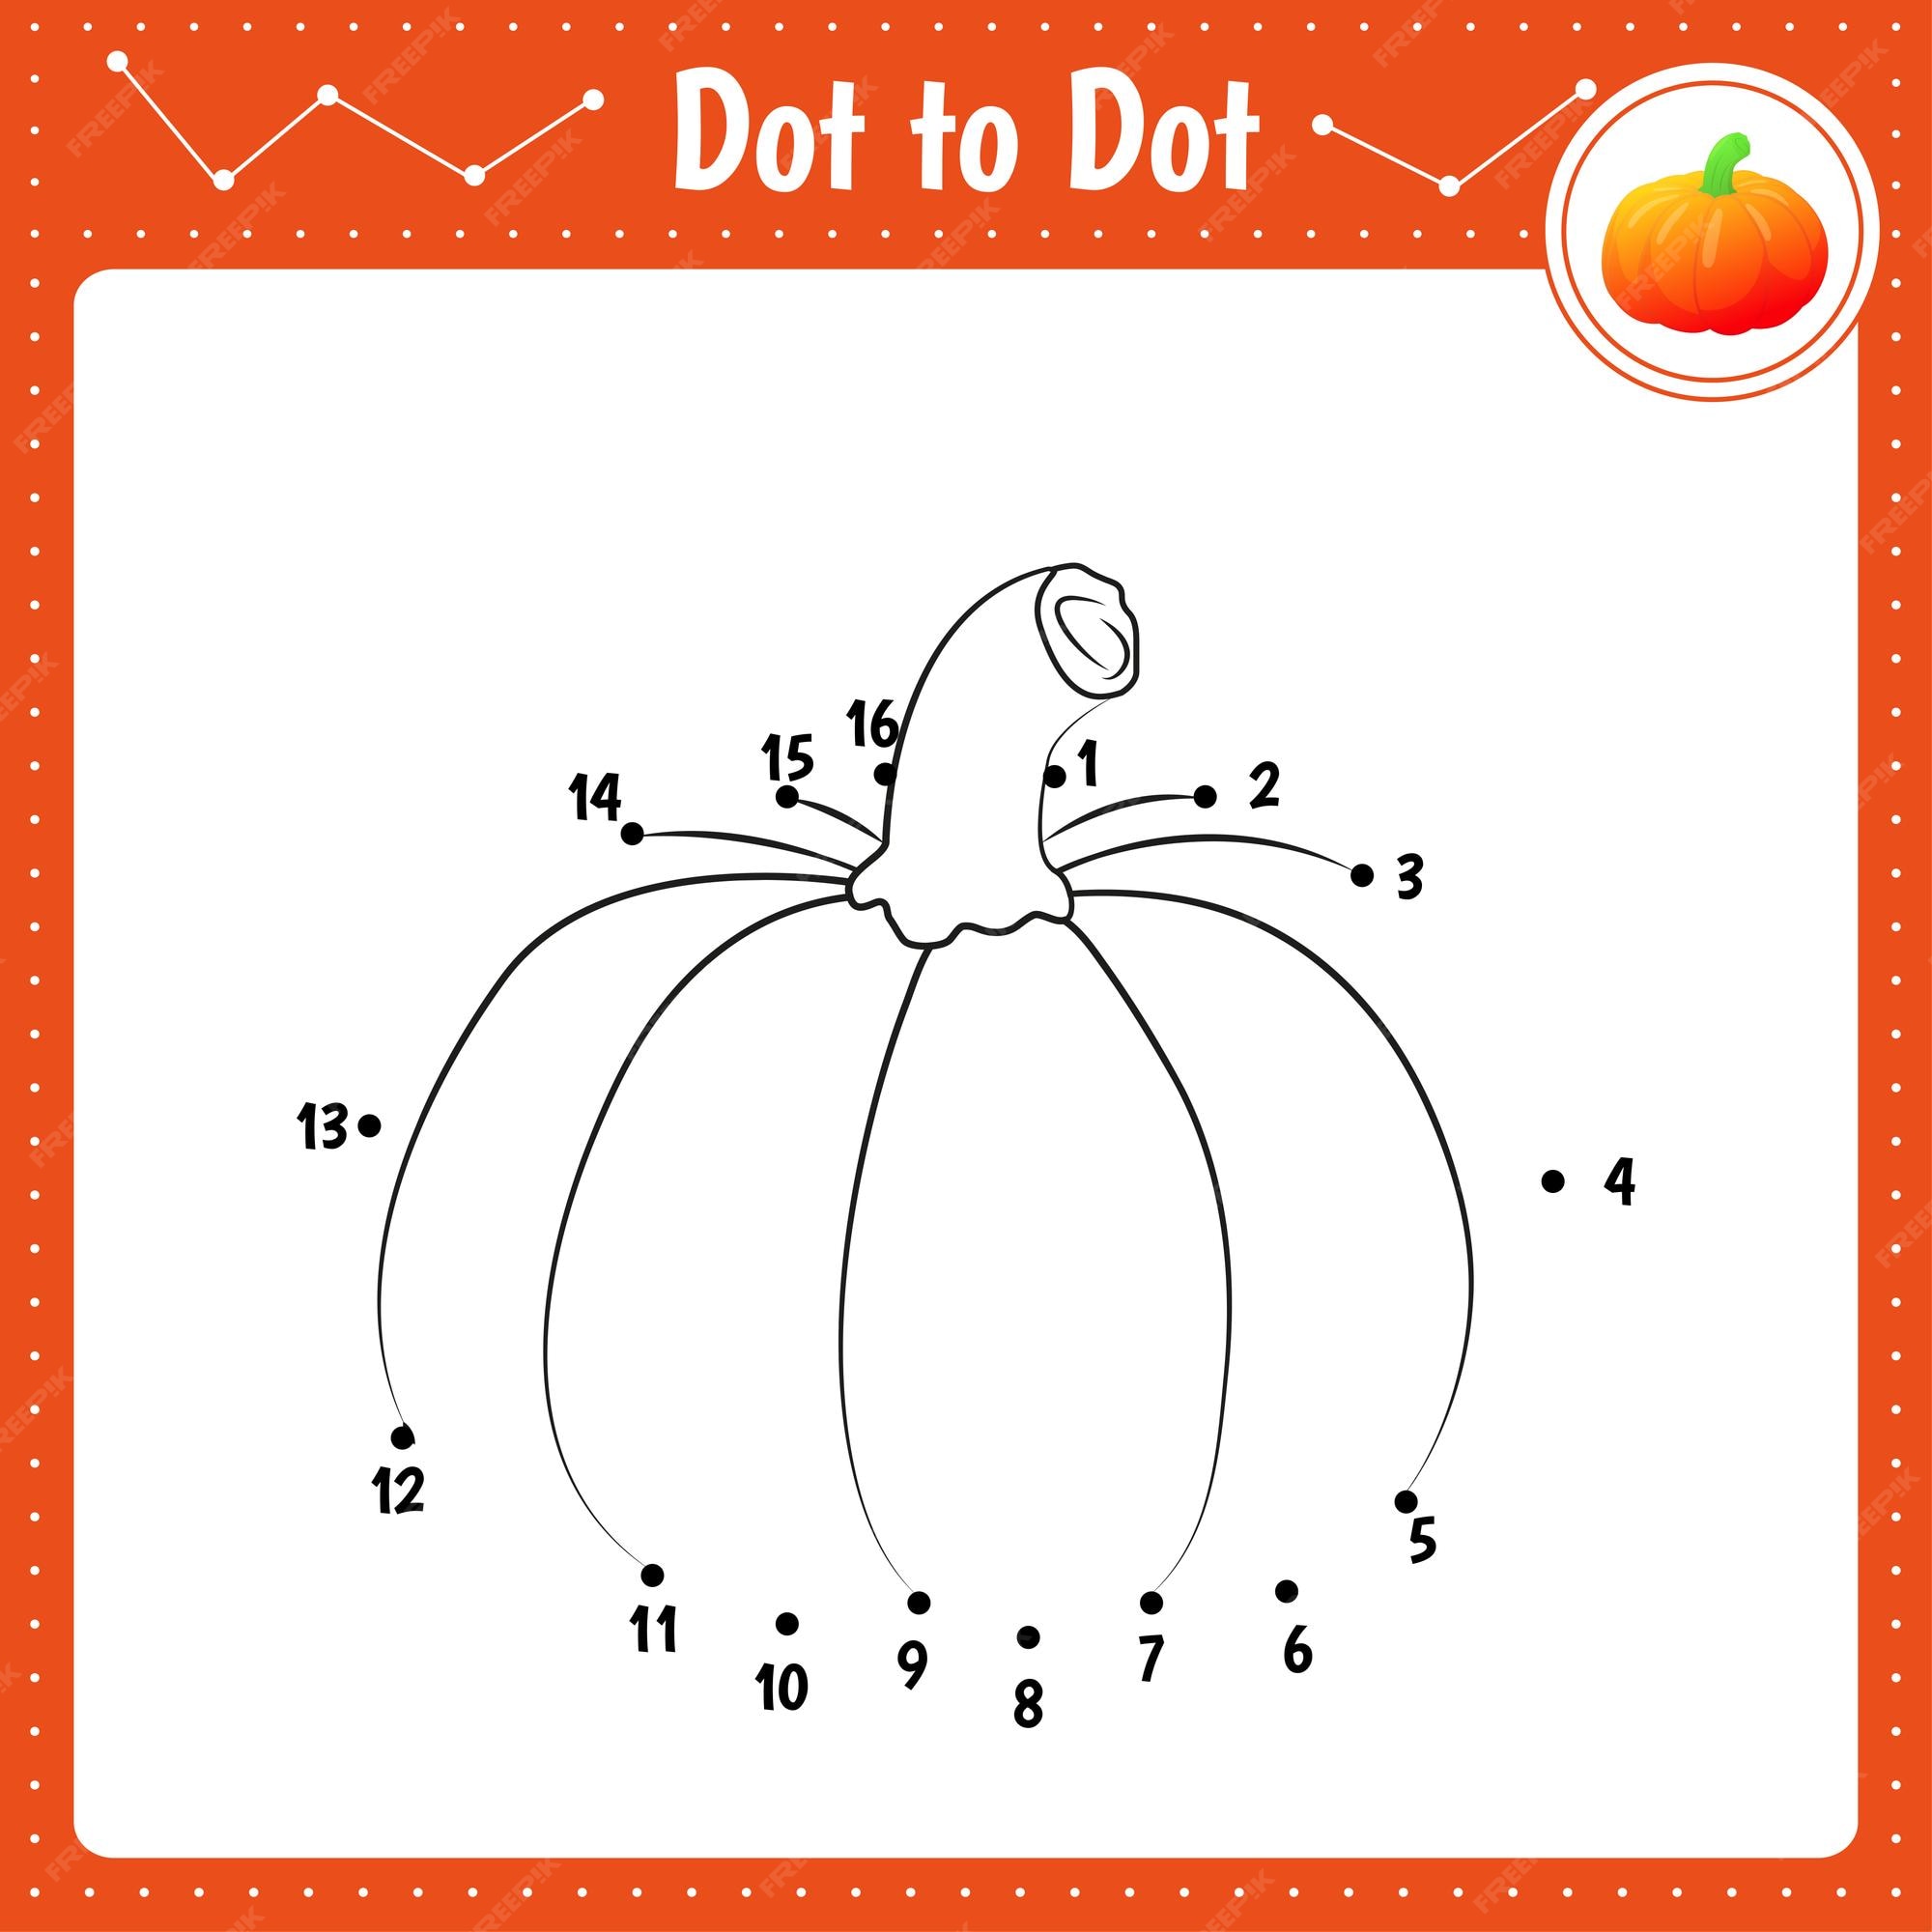 Premium vector connect the dots pumpkin dot to dot educational game coloring book for preschool kids activity worksheet vector illustration